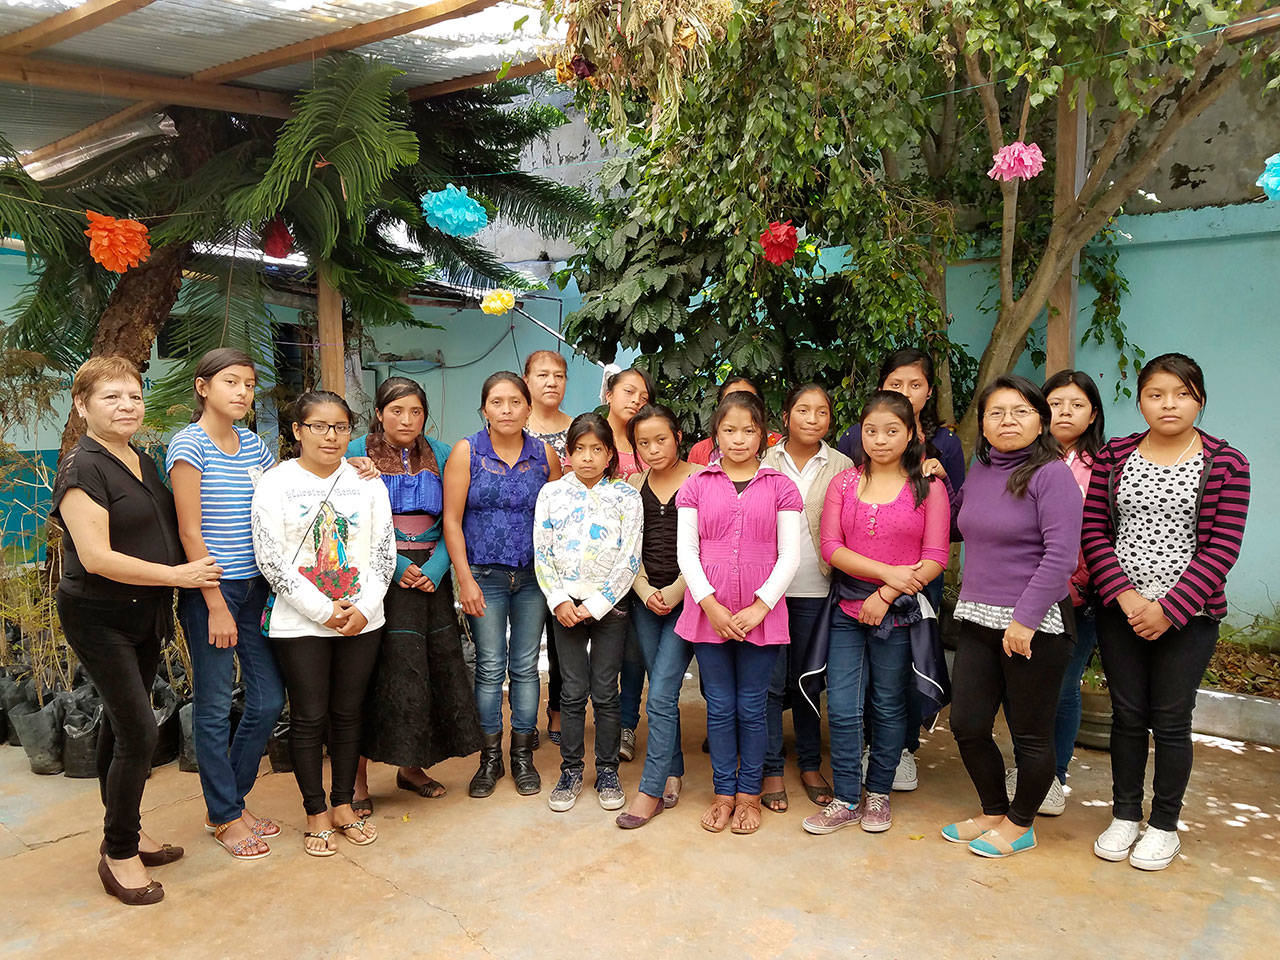 Current scholarship recipients of Mujeres de Maíz Opportunity Foundation stand for a group photograph. (Judith Pasco)